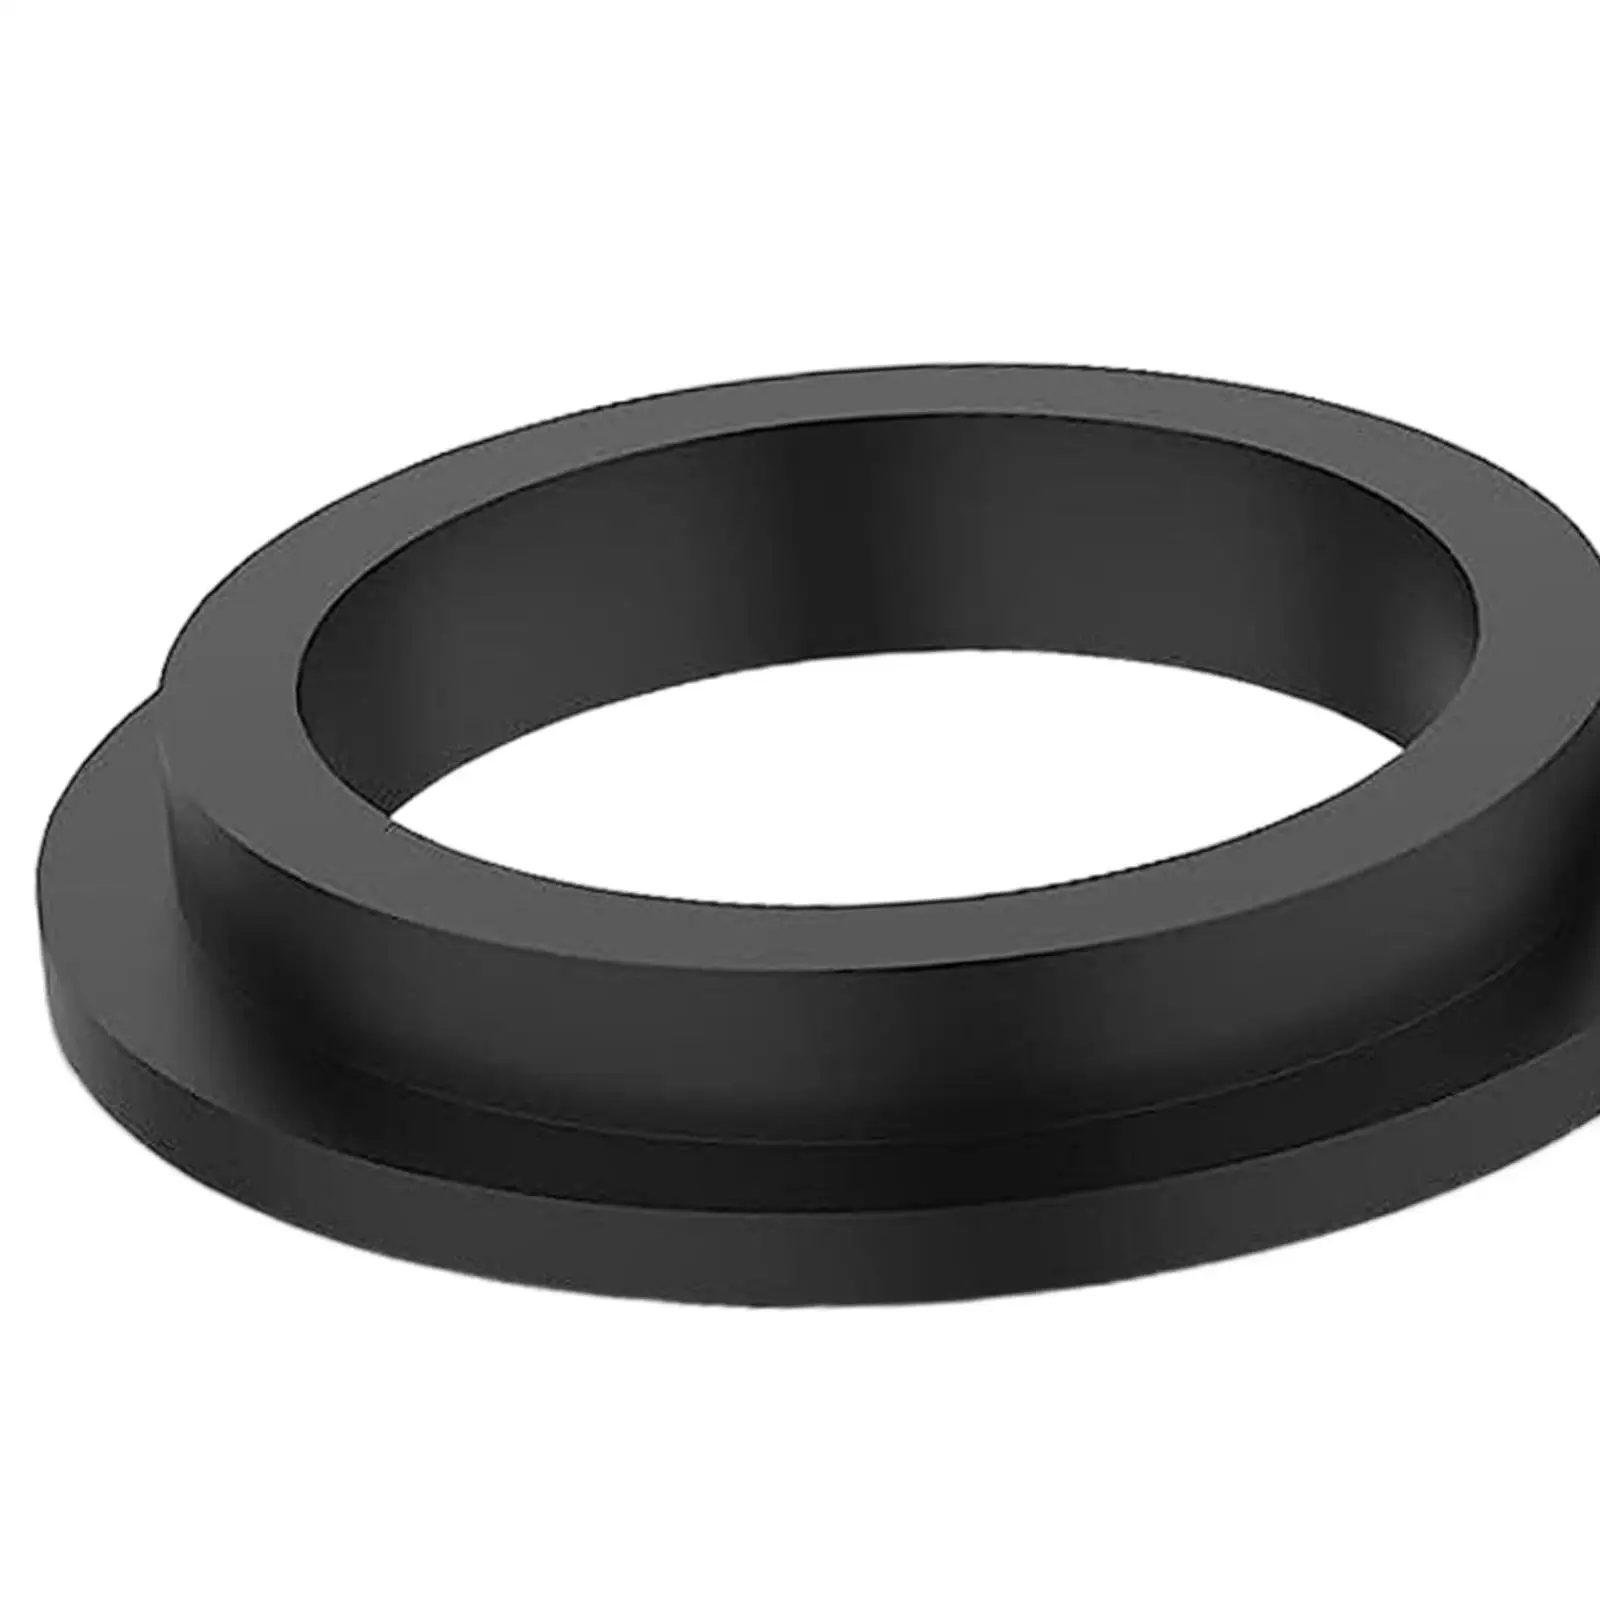 Replacement O Ring for 11412 Sand Filter Pump Motor, Pool Fittings